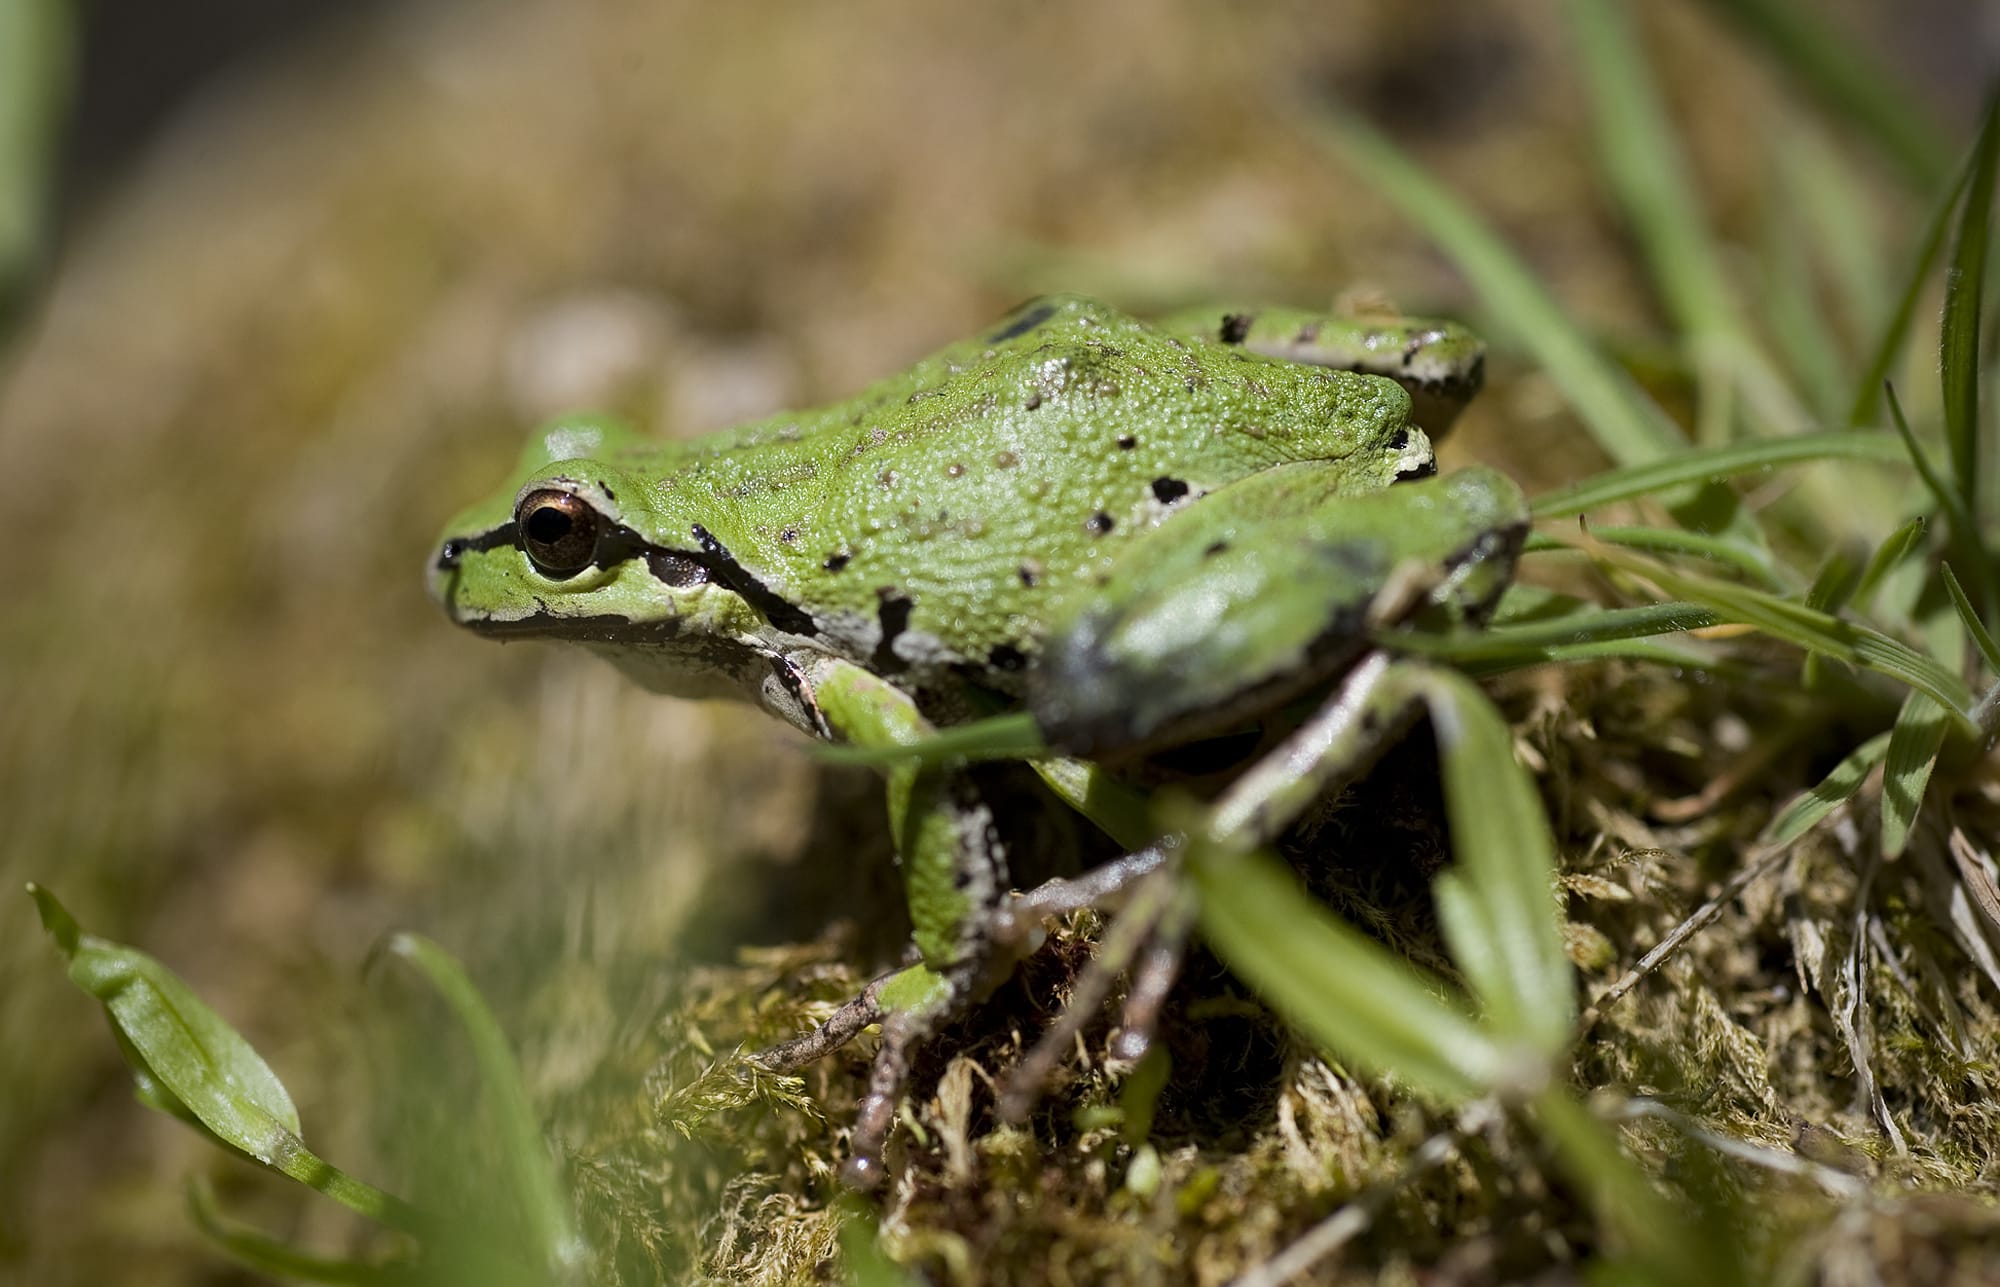 A Pacific tree frog is one of many creatures that will be identified during the 14th annual Critter Count on Saturday.